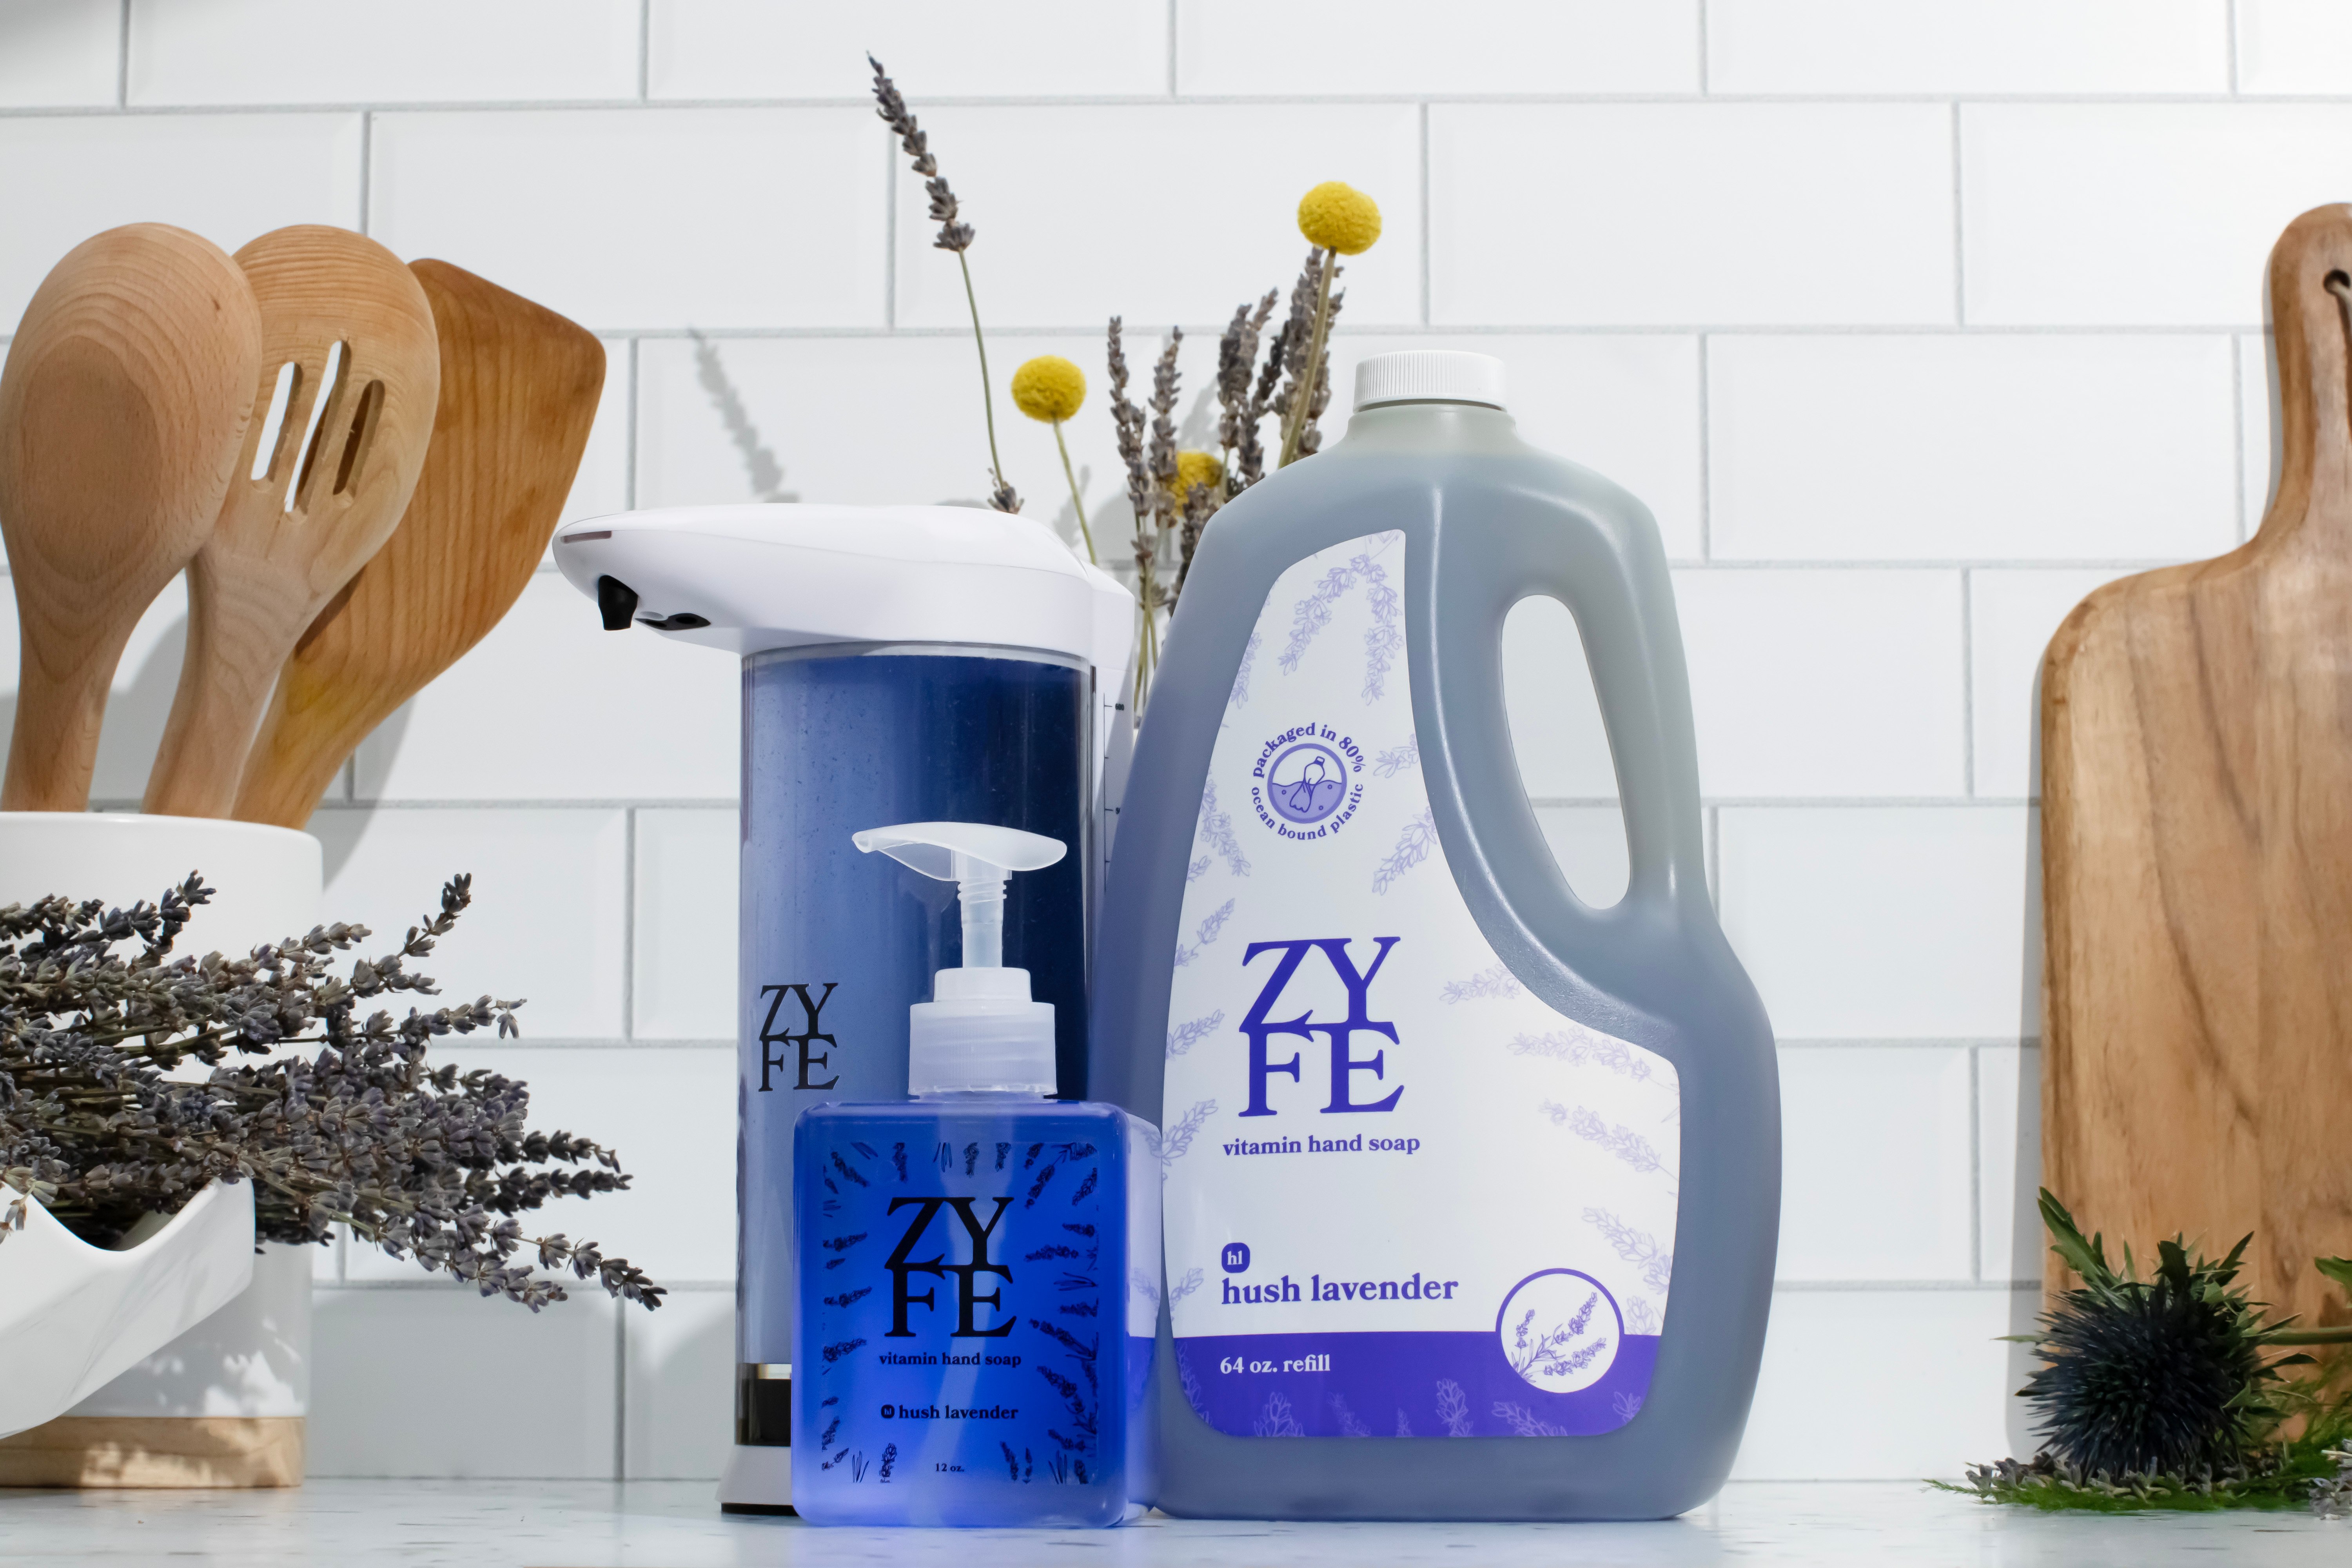 image of zyfe soap hush lavender 12oz and 64oz bottles, and a dock soap dispenser, grouped together on a kitchen counter